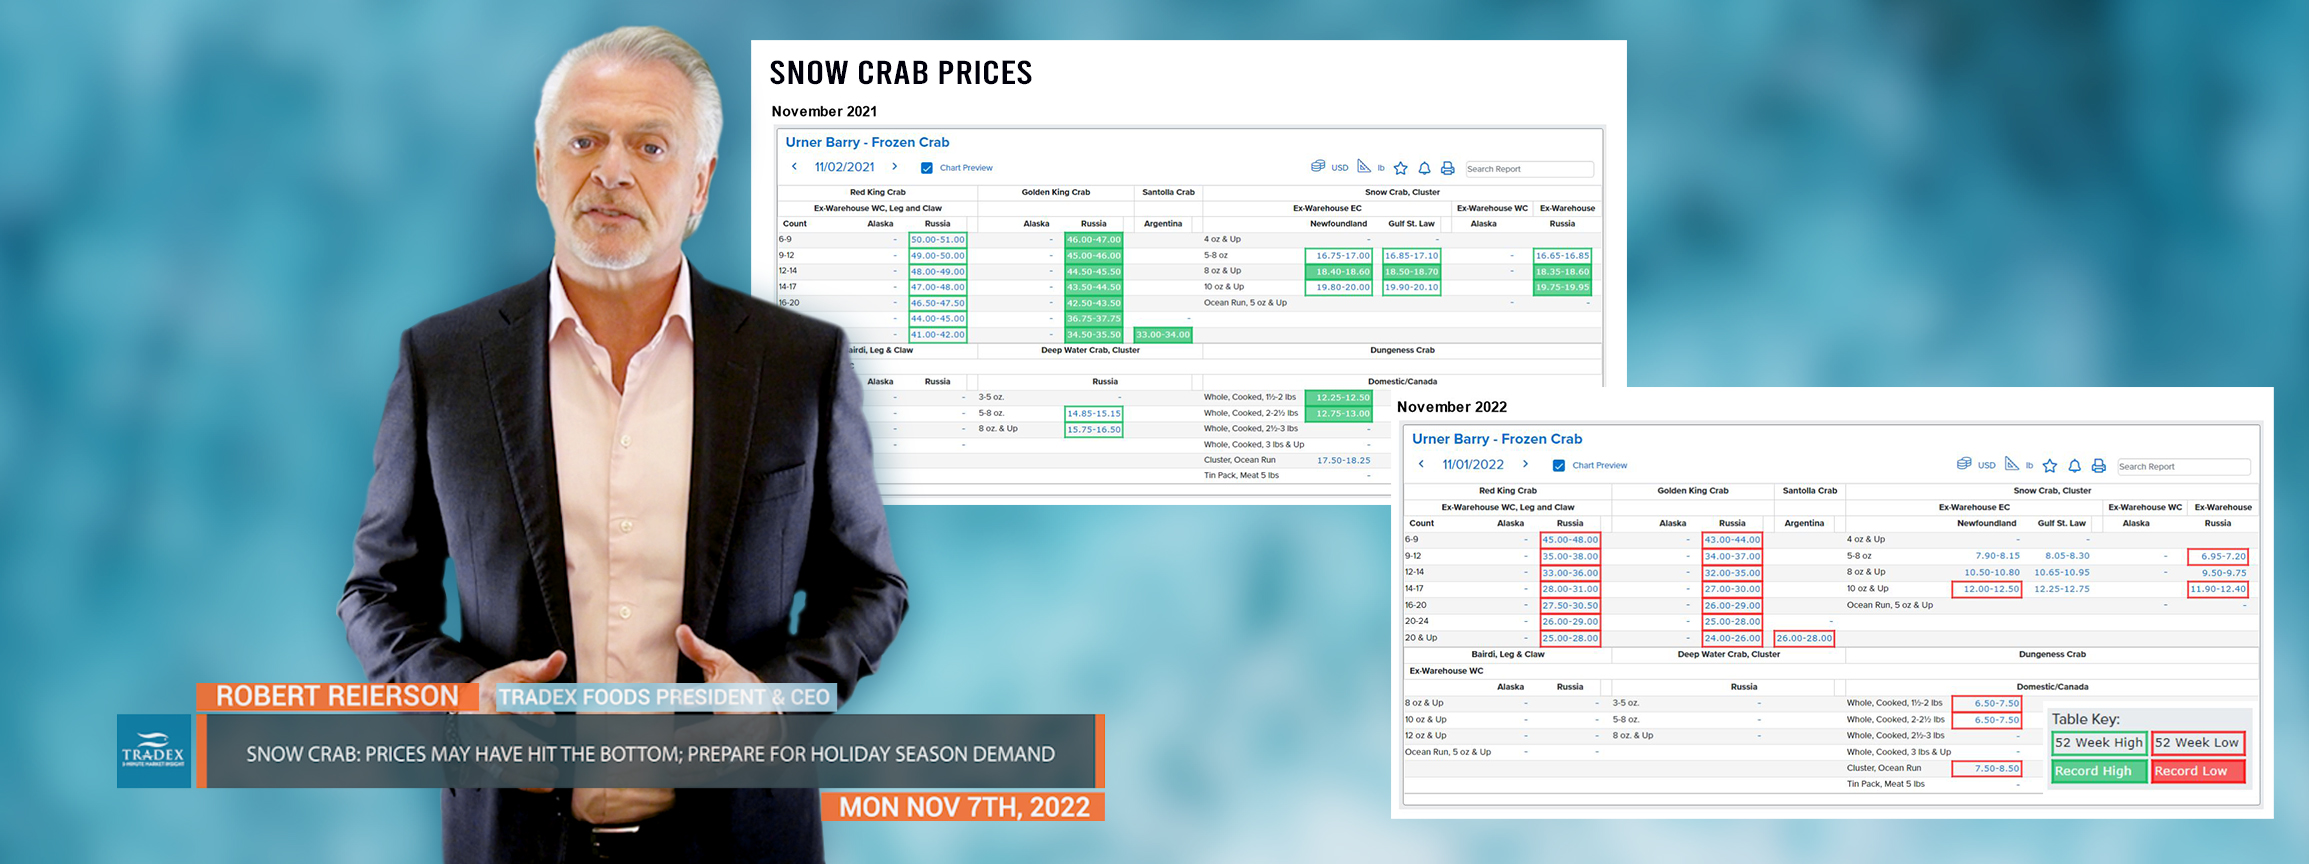 Global Snow Crab Update (Nov 2022): Prices May Have Hit The Bottom; Prepare for Holiday Season Demand